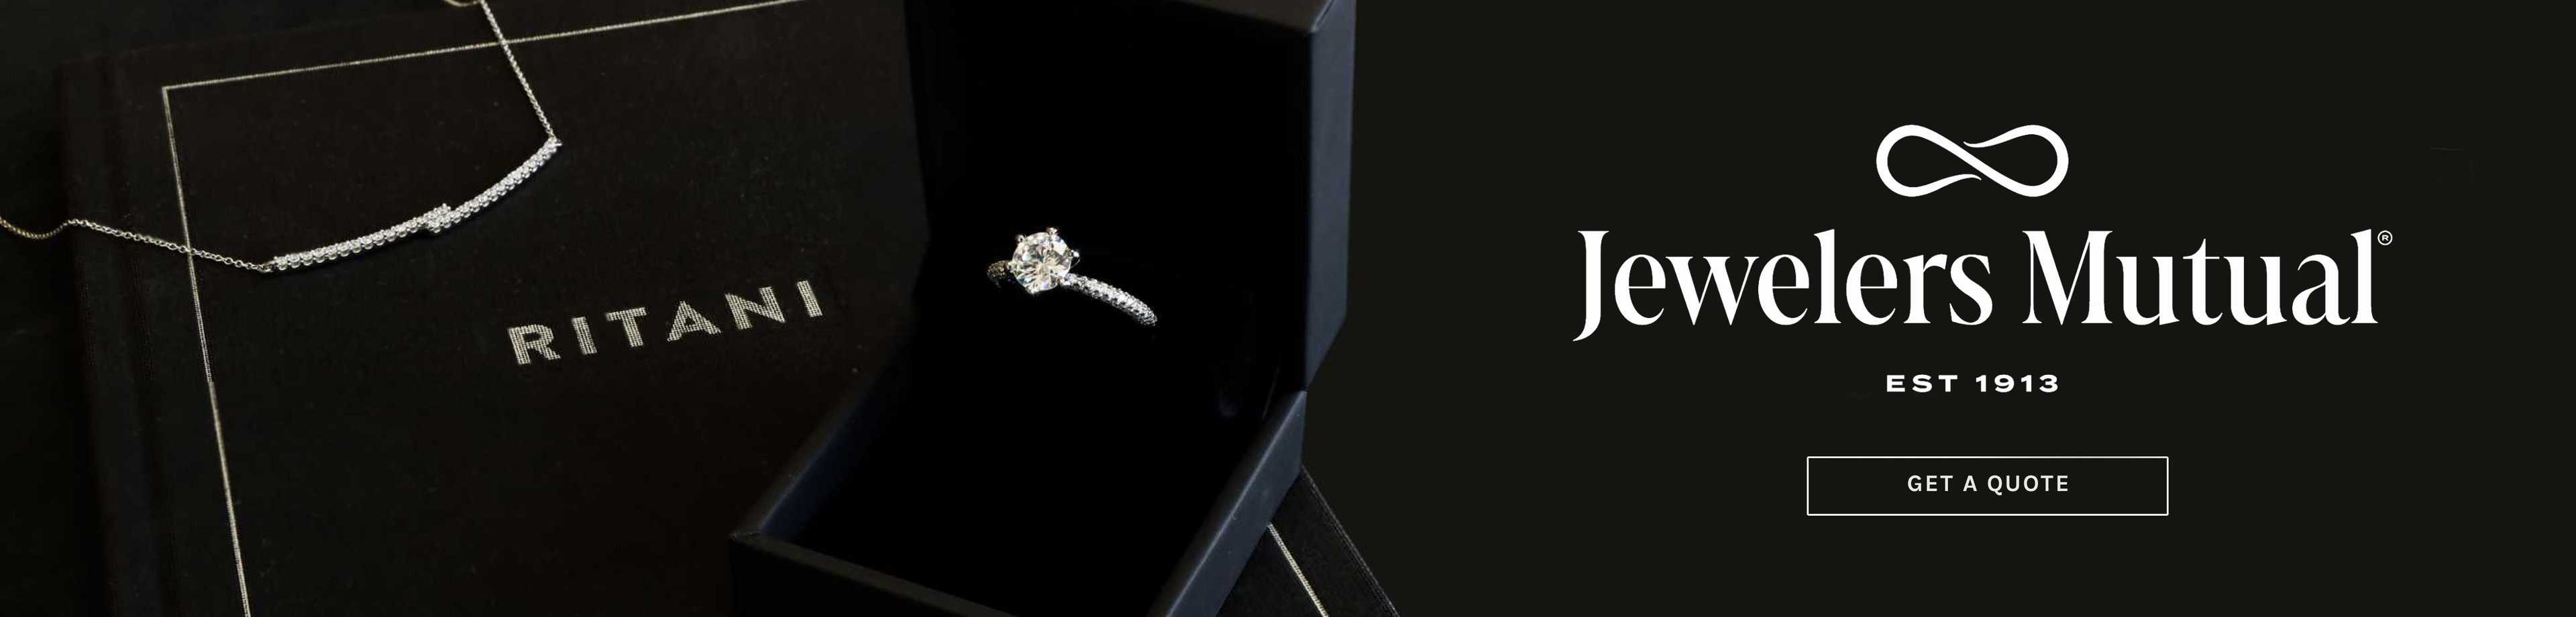 Jewelers Mutual EST 1913 - Get A Quote